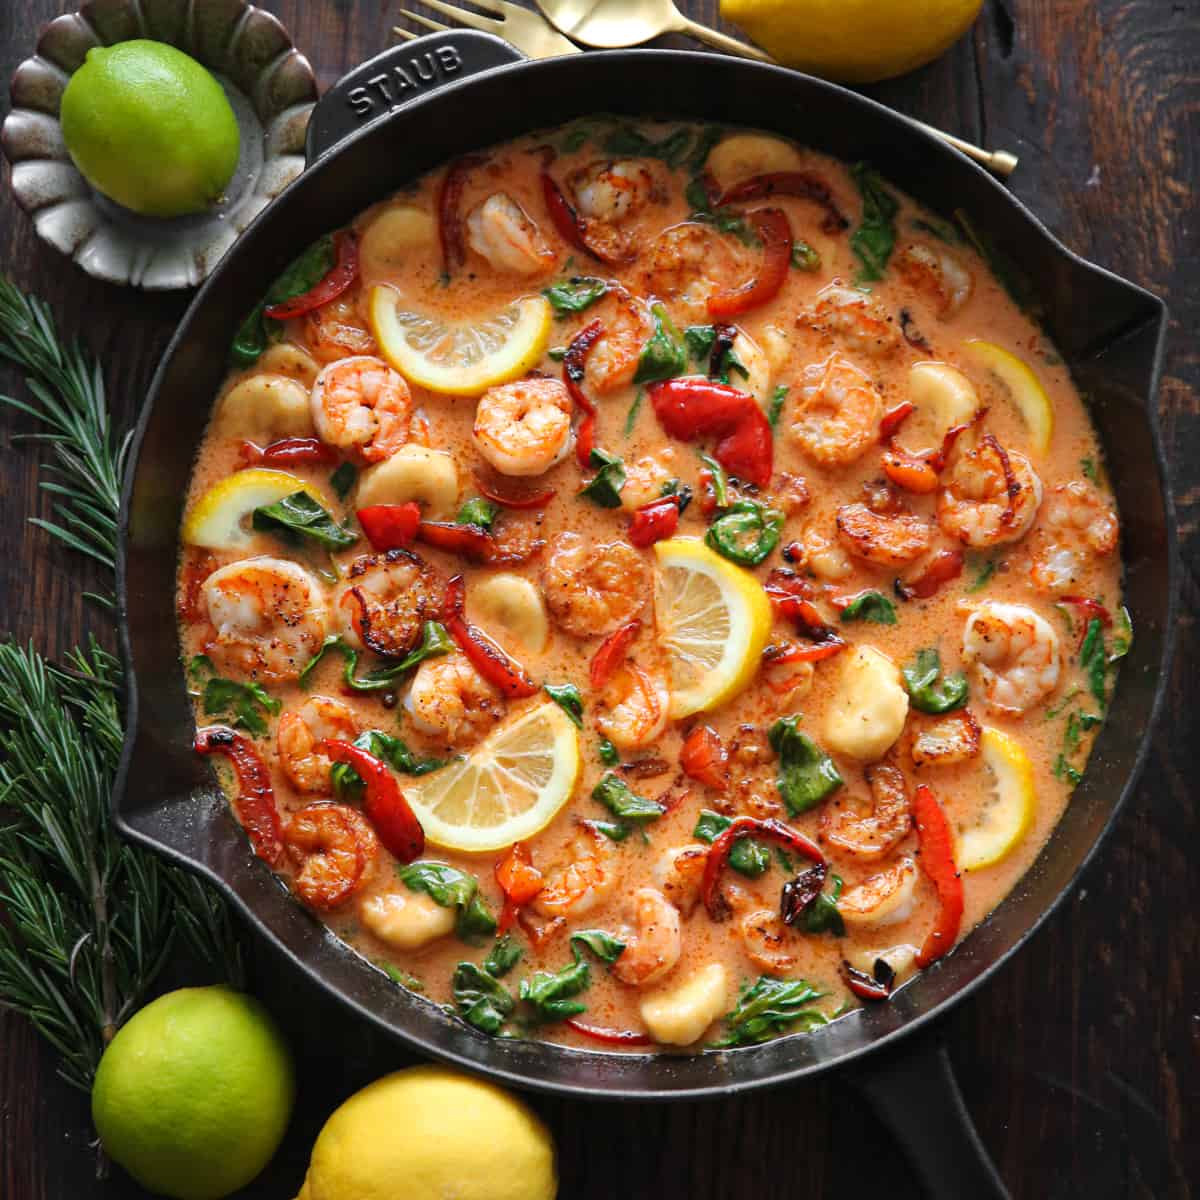 Red Coconut Curry Shrimp with Bananas, Bell Peppers, and Spinach - in a cast iron skillet.